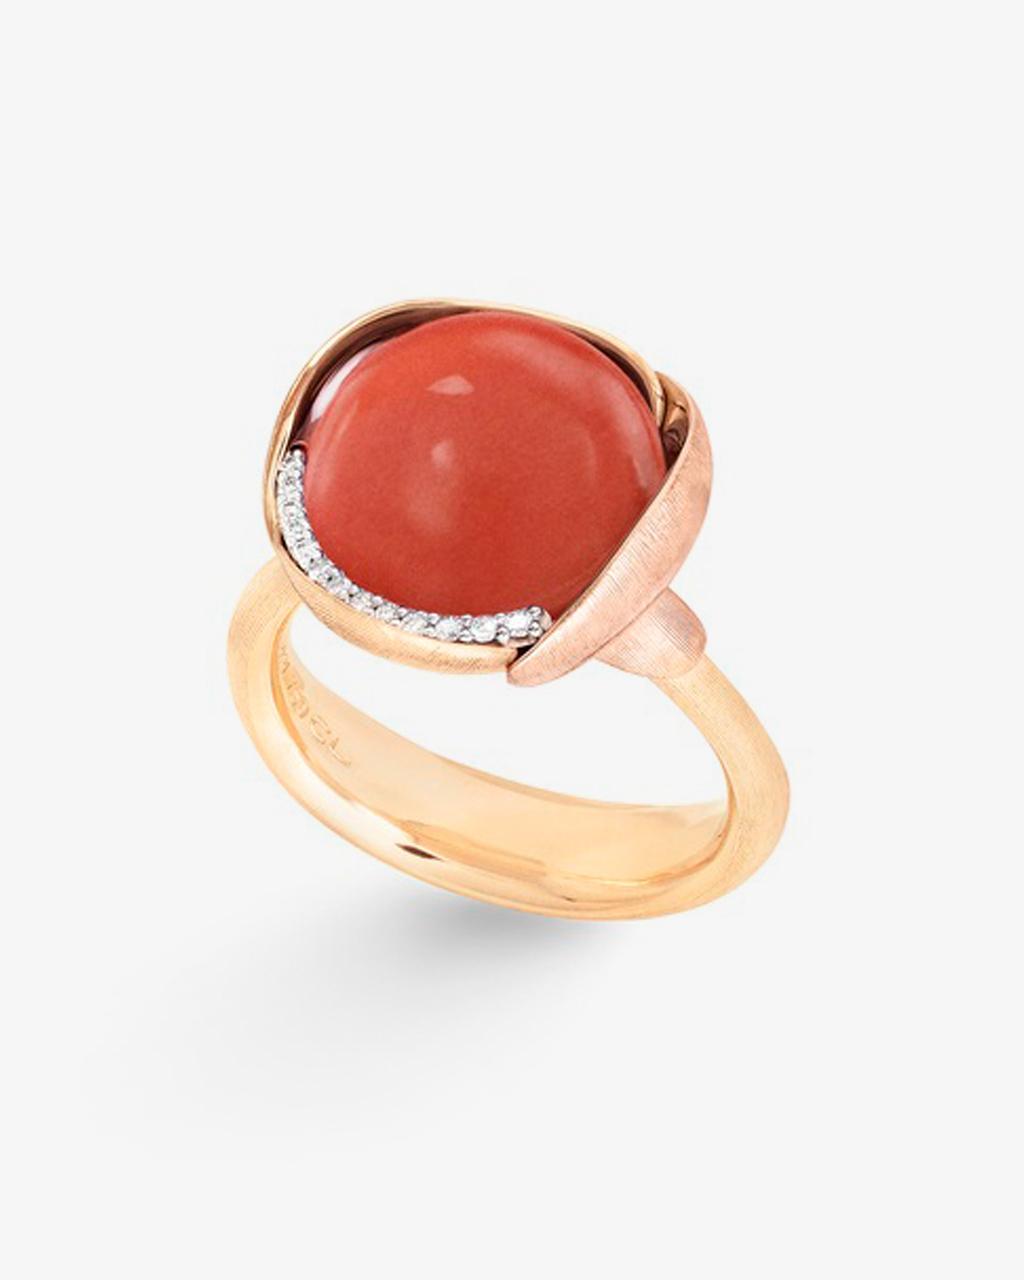 Ole Lynggaard 'Lotus' Red Coral & Diamond Ring - Size 3